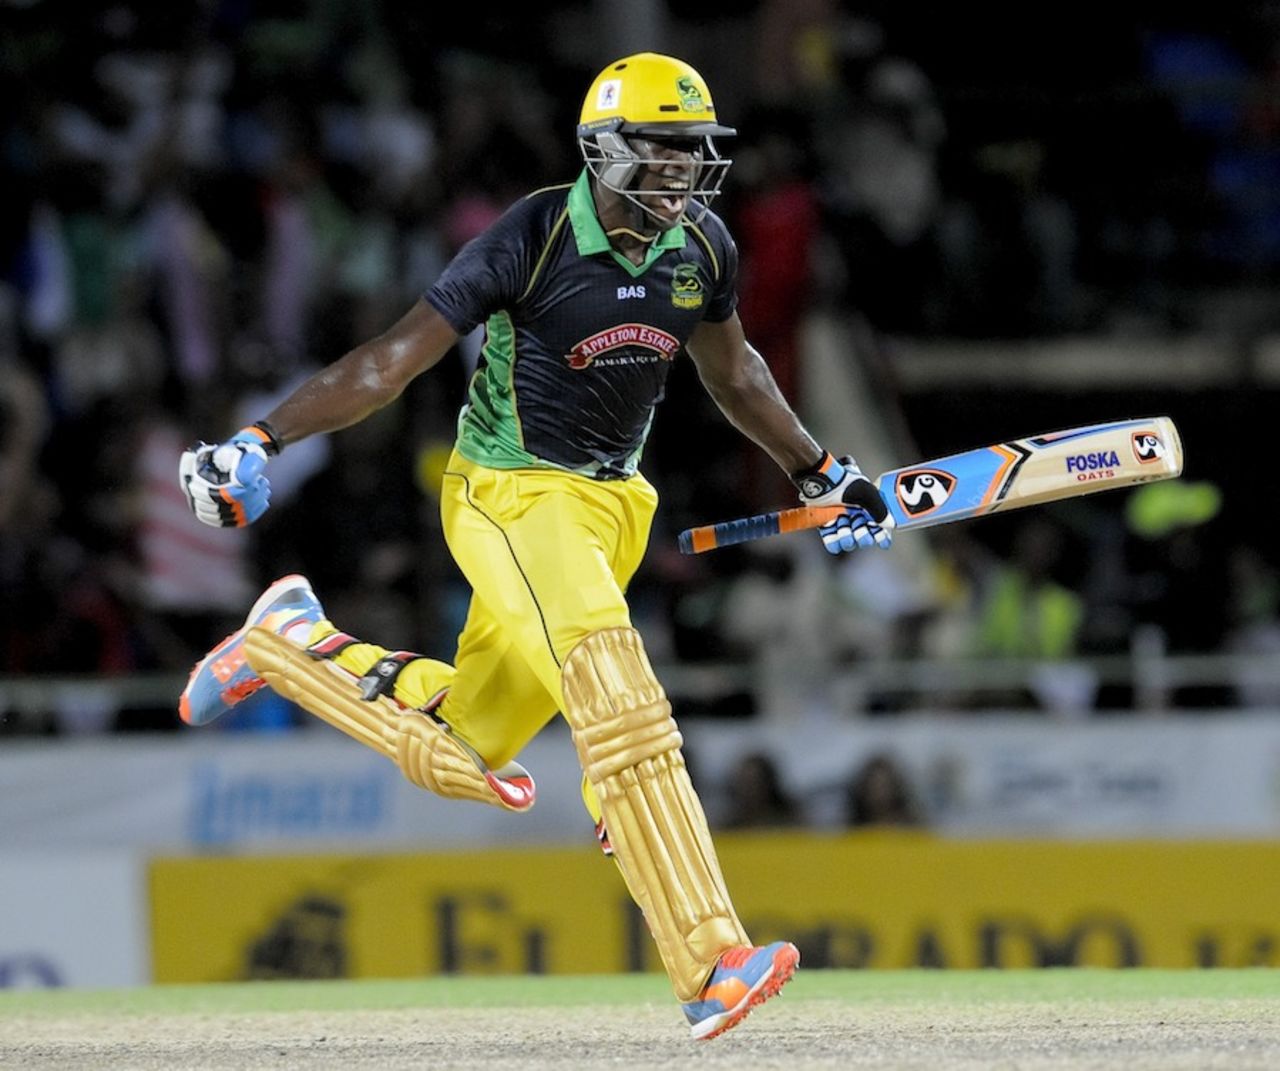 Andre Russell celebrates the winning runs, Jamaica Tallawahs v Trinidad & Tobago Red Steel, CPL, 1st semi-final, St. Kitts, August 13, 2014